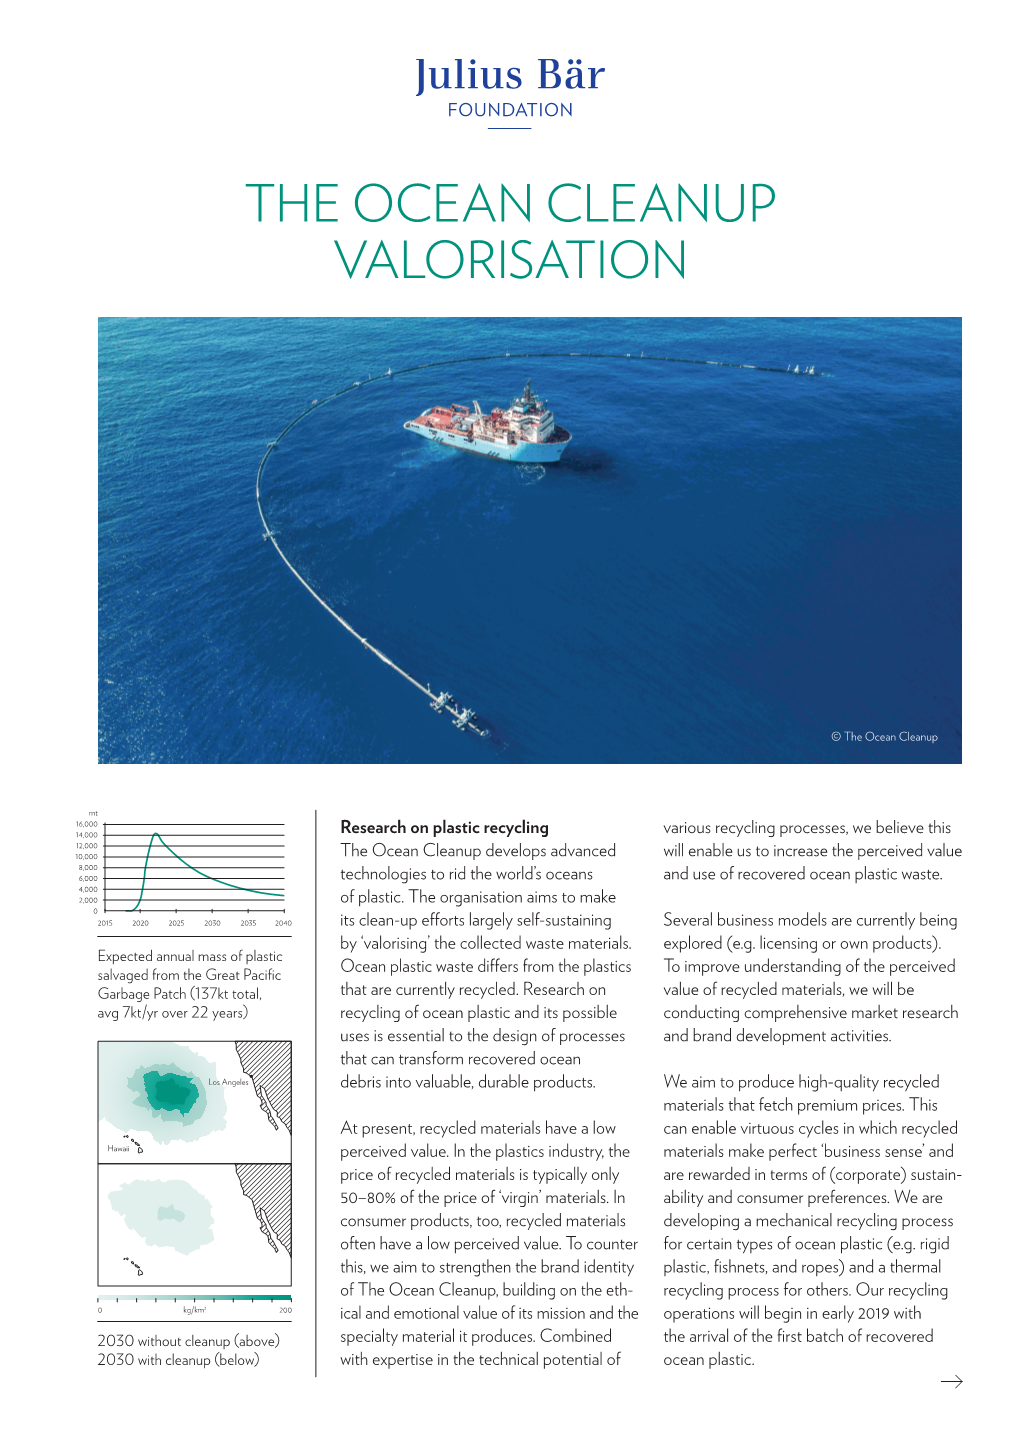 The Ocean Cleanup Valorisation